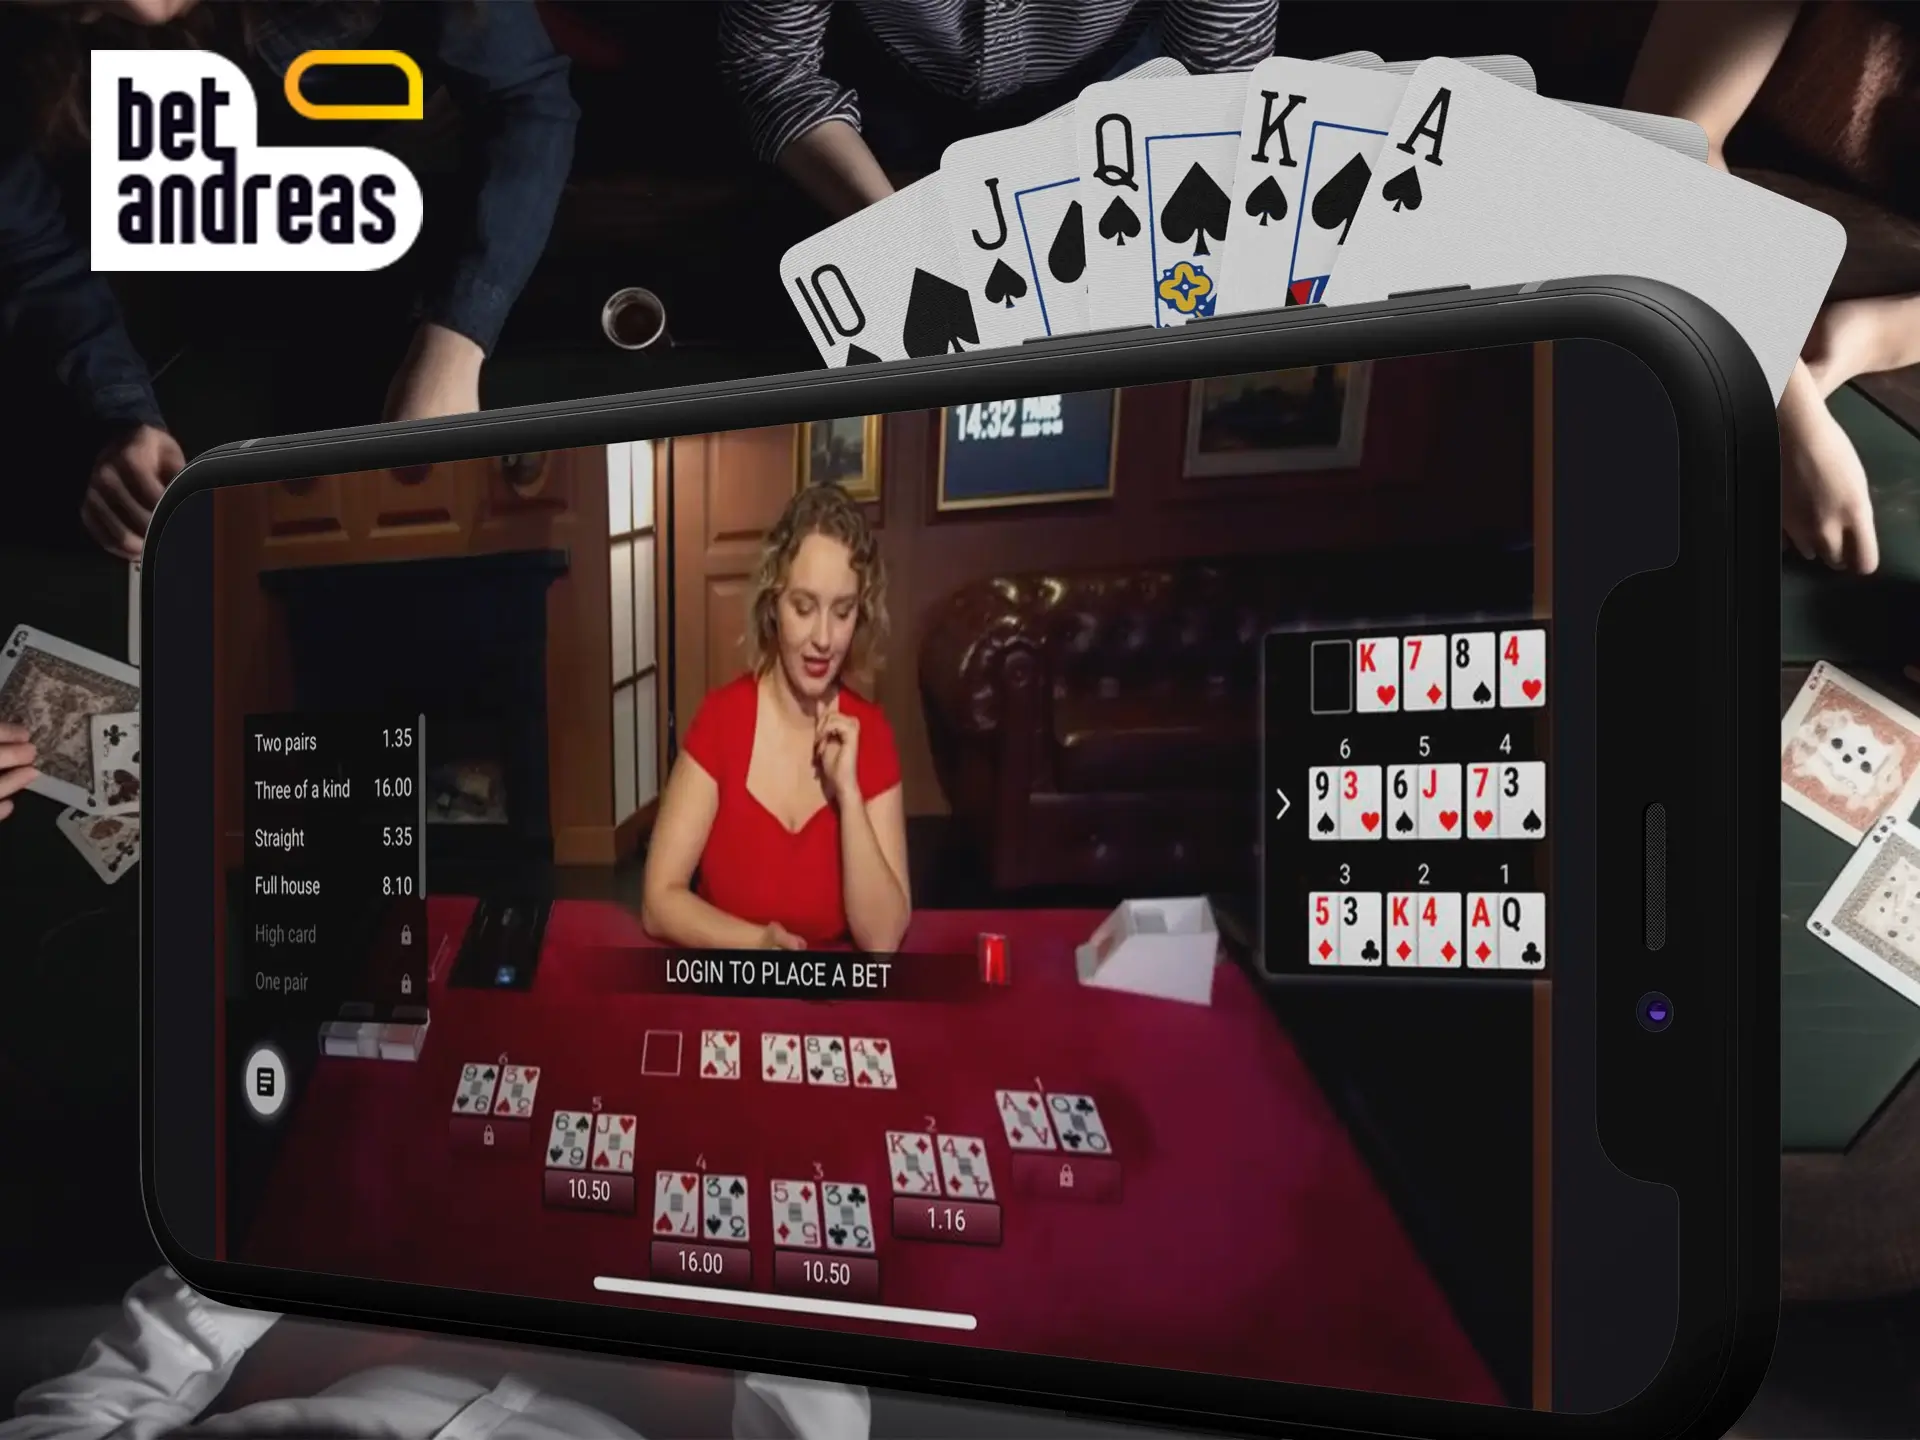 Different variations of poker are featured in the BetAndreas app.